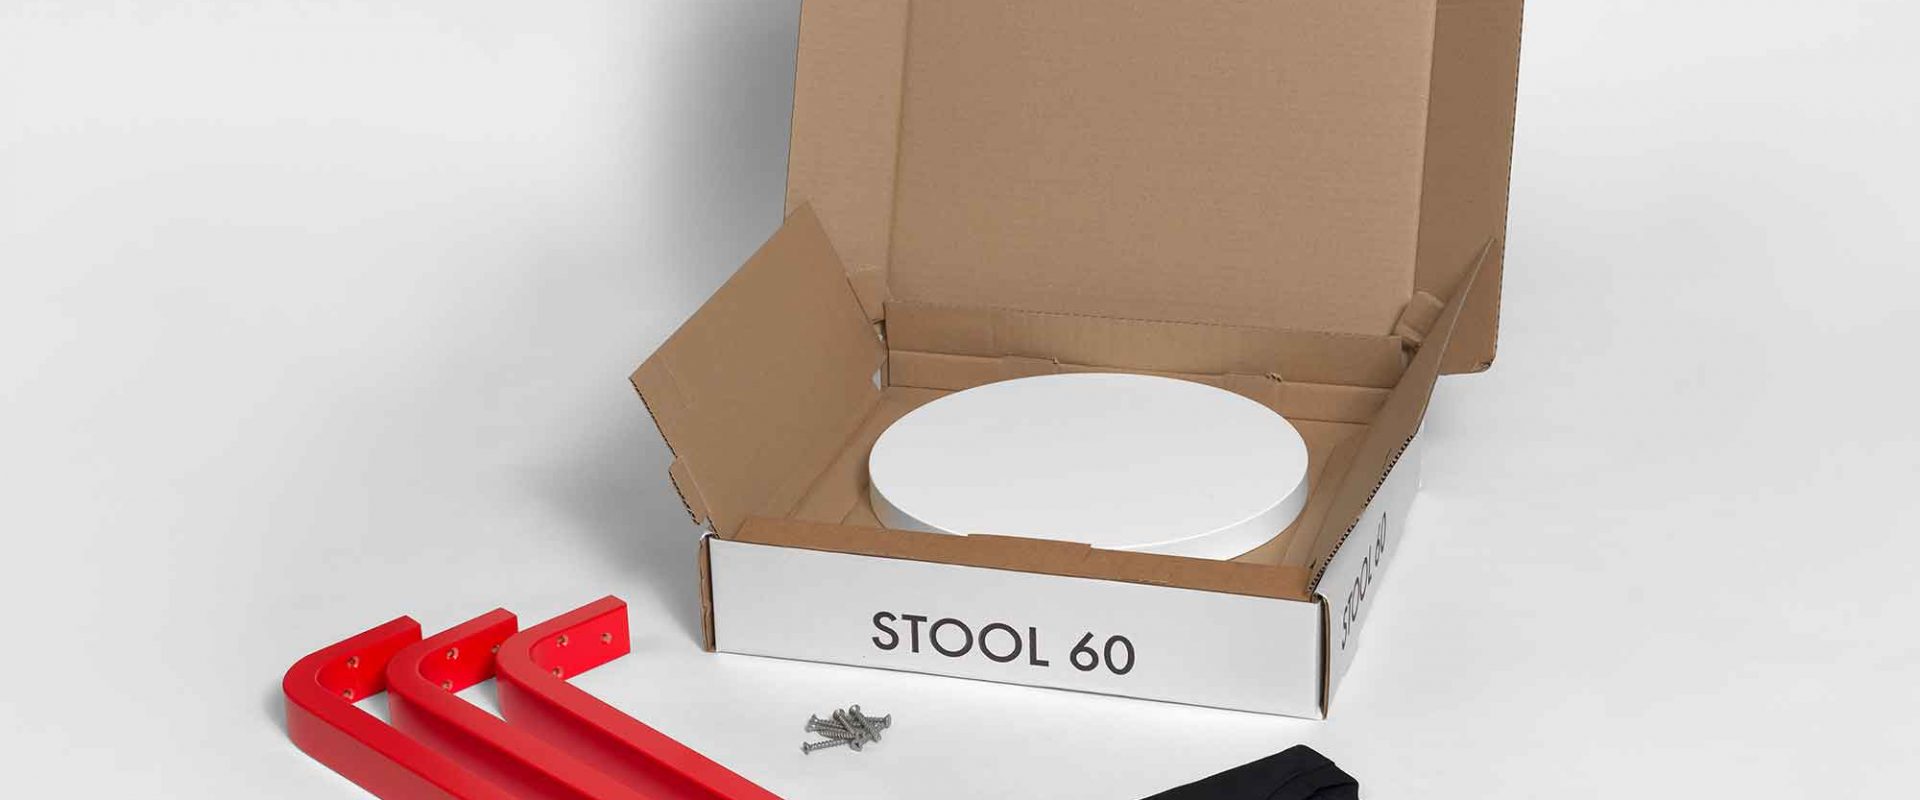 Stool 60, 21 Questions